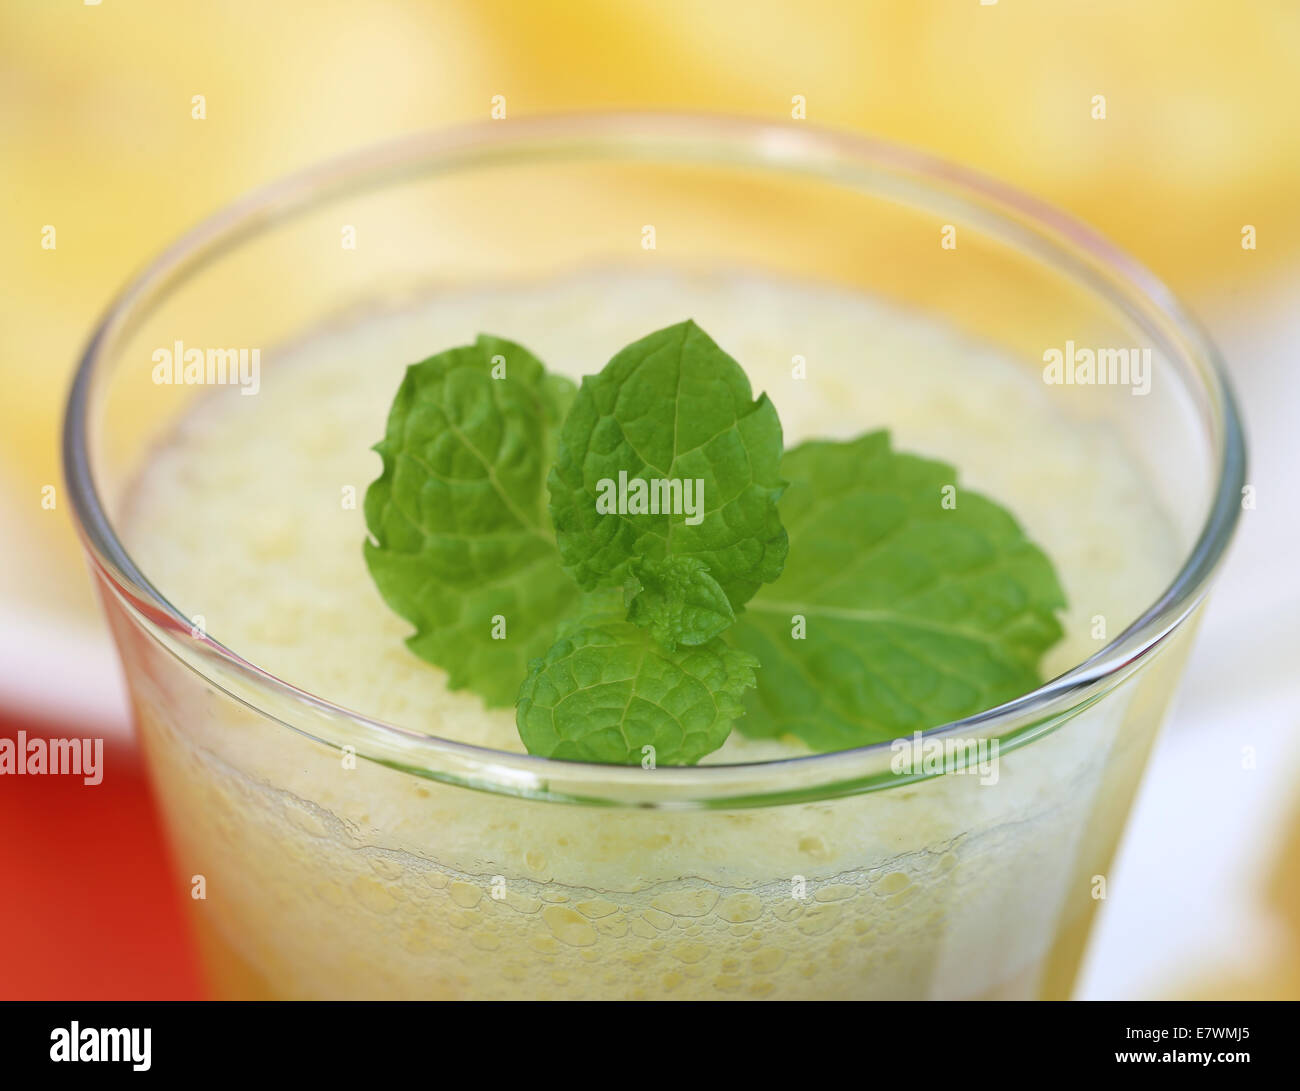 Pineapple Juice in glass with mint leaves Stock Photo